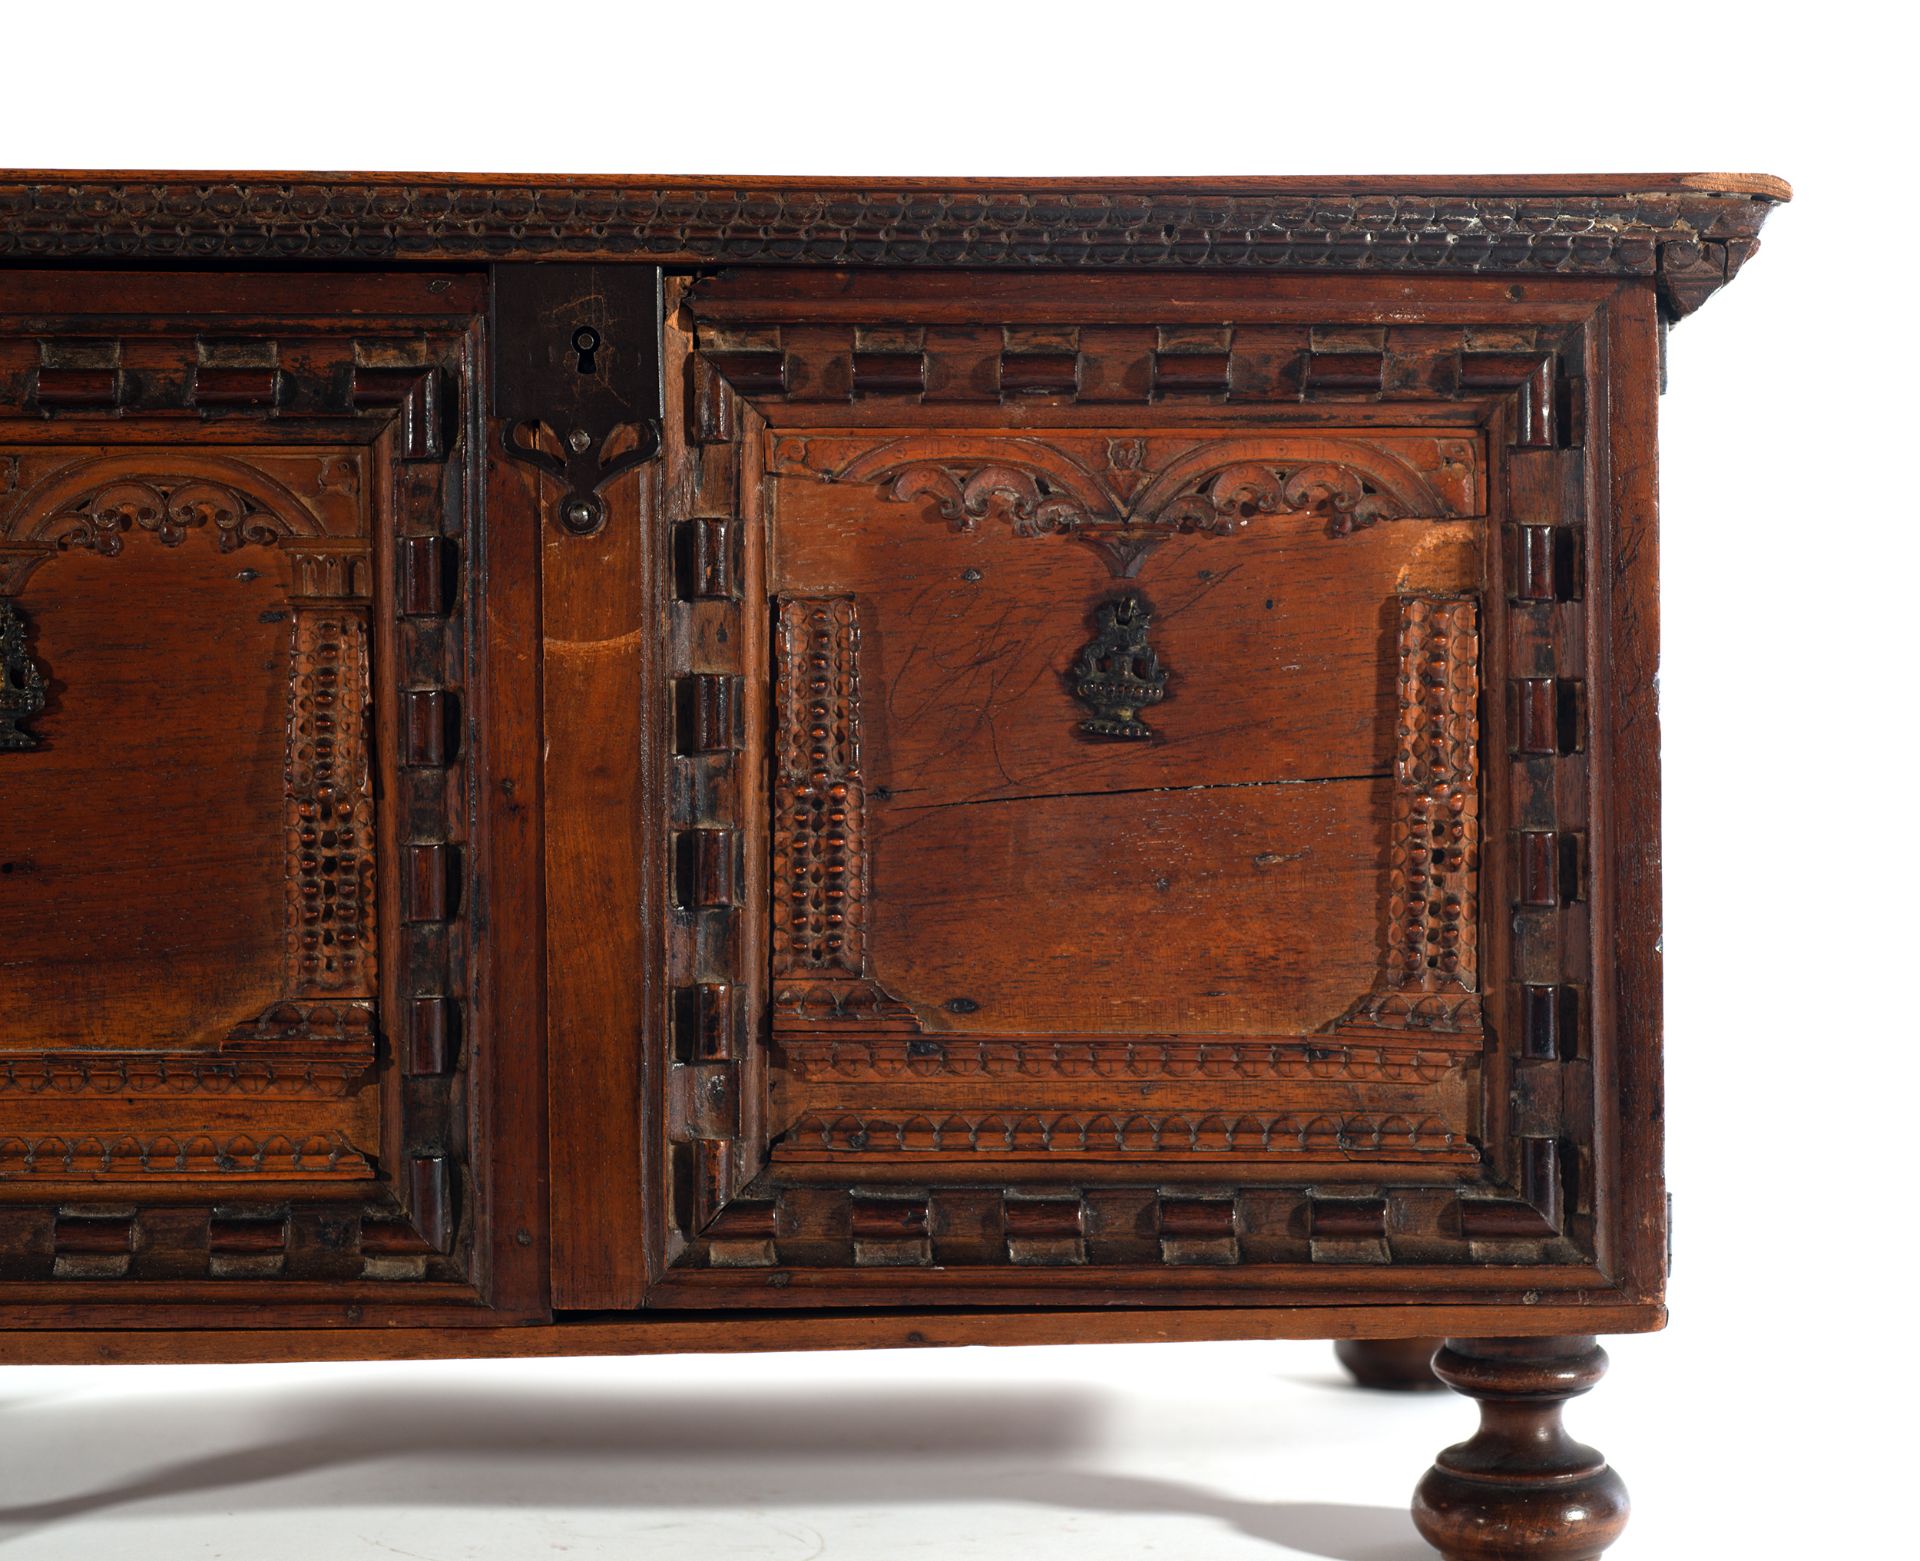 Exceptional plateresque chest in fruit wood, boxwood and marquetry, Spanish Renaissance, mid-16th ce - Image 7 of 13